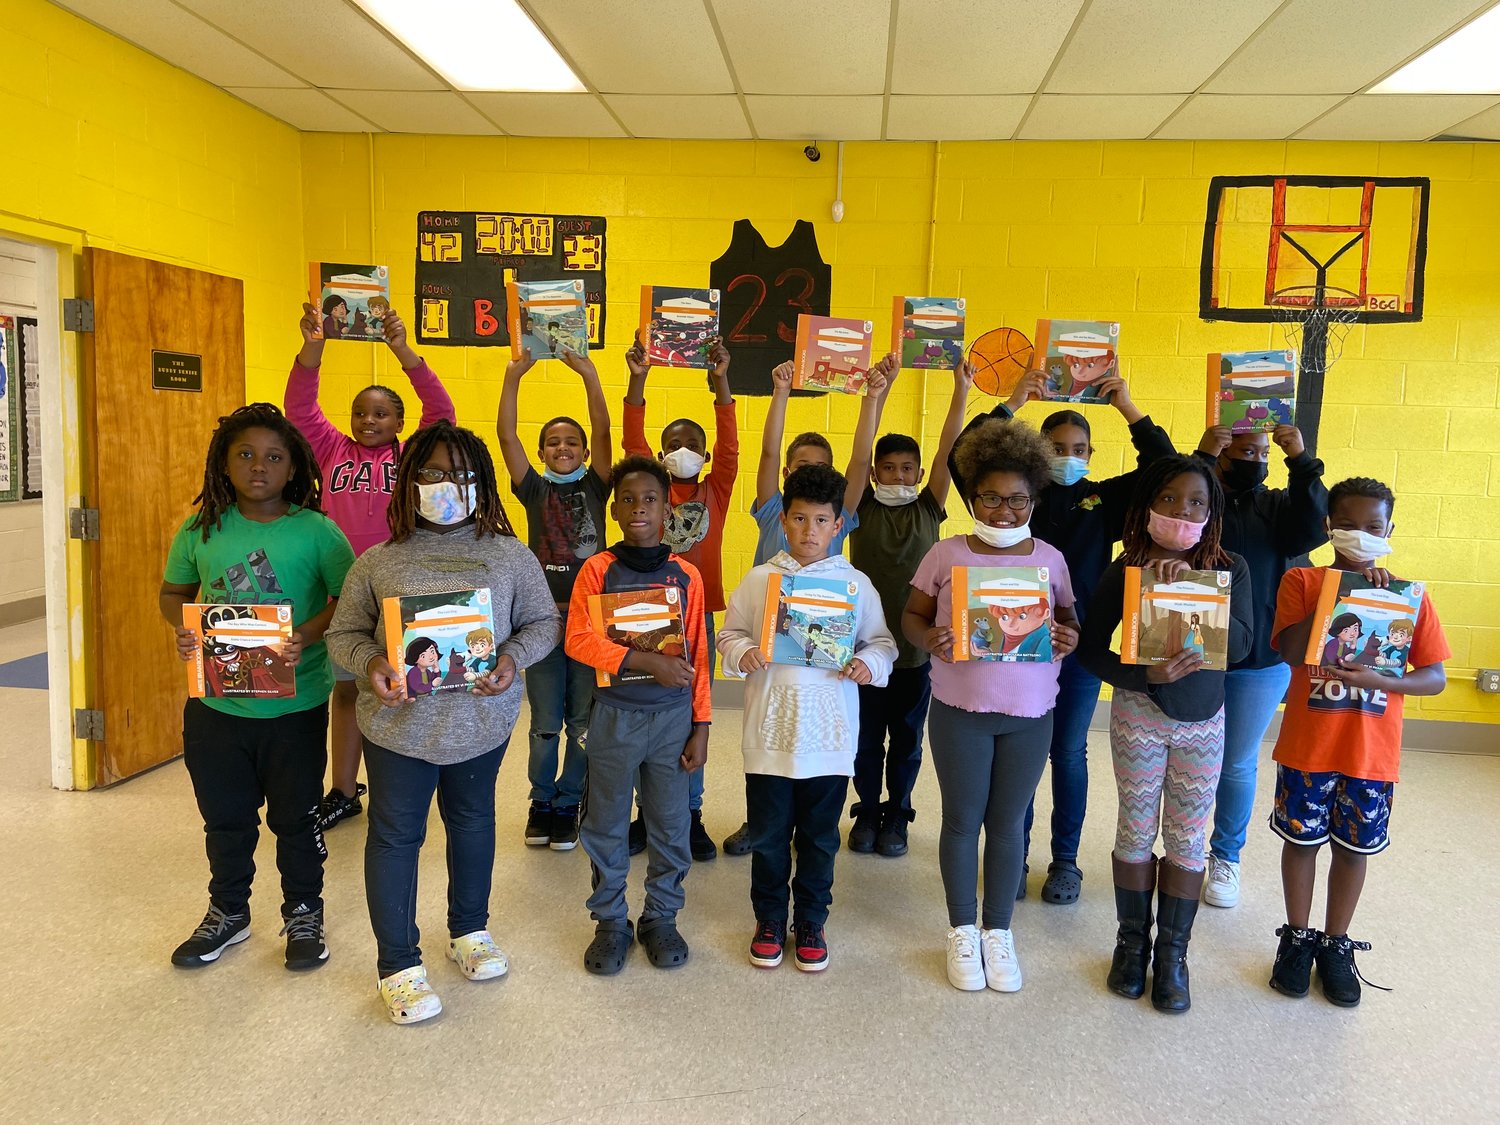 Some of the 40 or so participants in a program last summer at the Boys & Girls Club in Siler City hold up the books they authored.